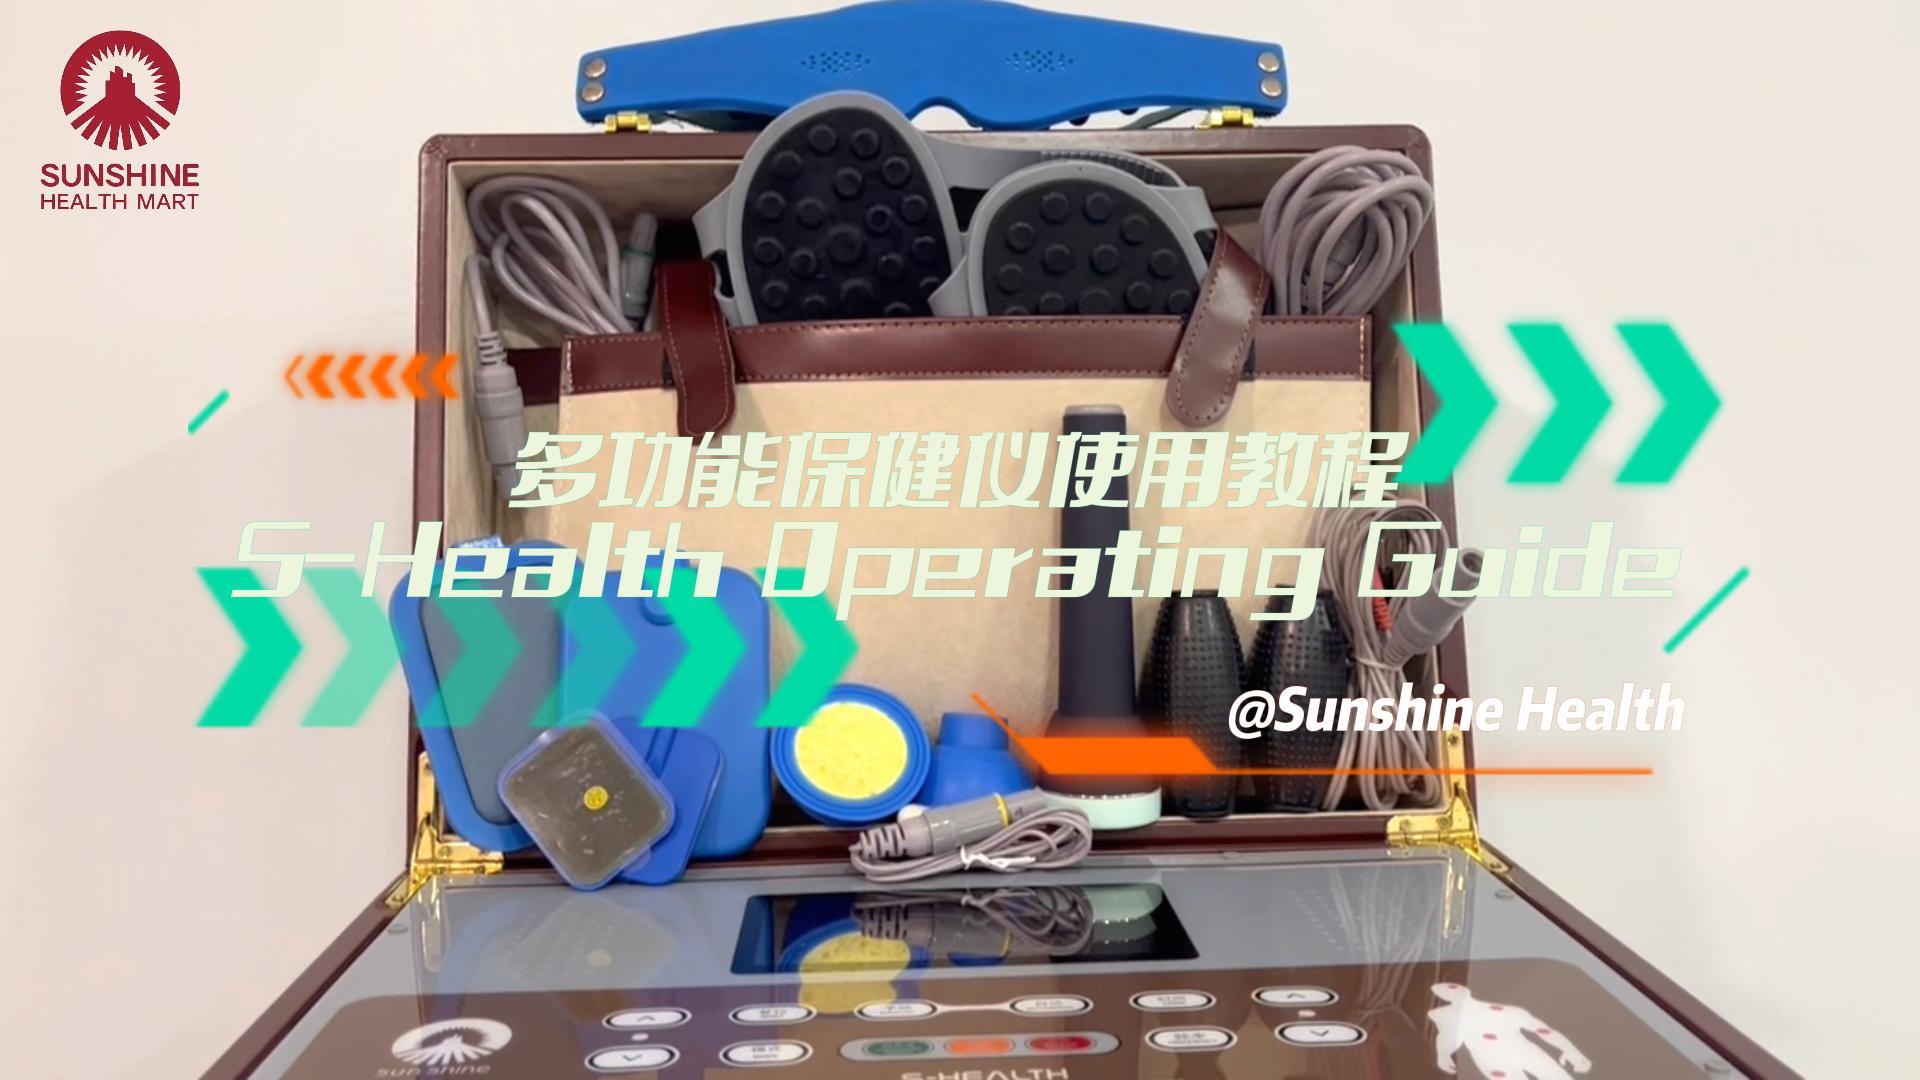 S-Health Operating Guide